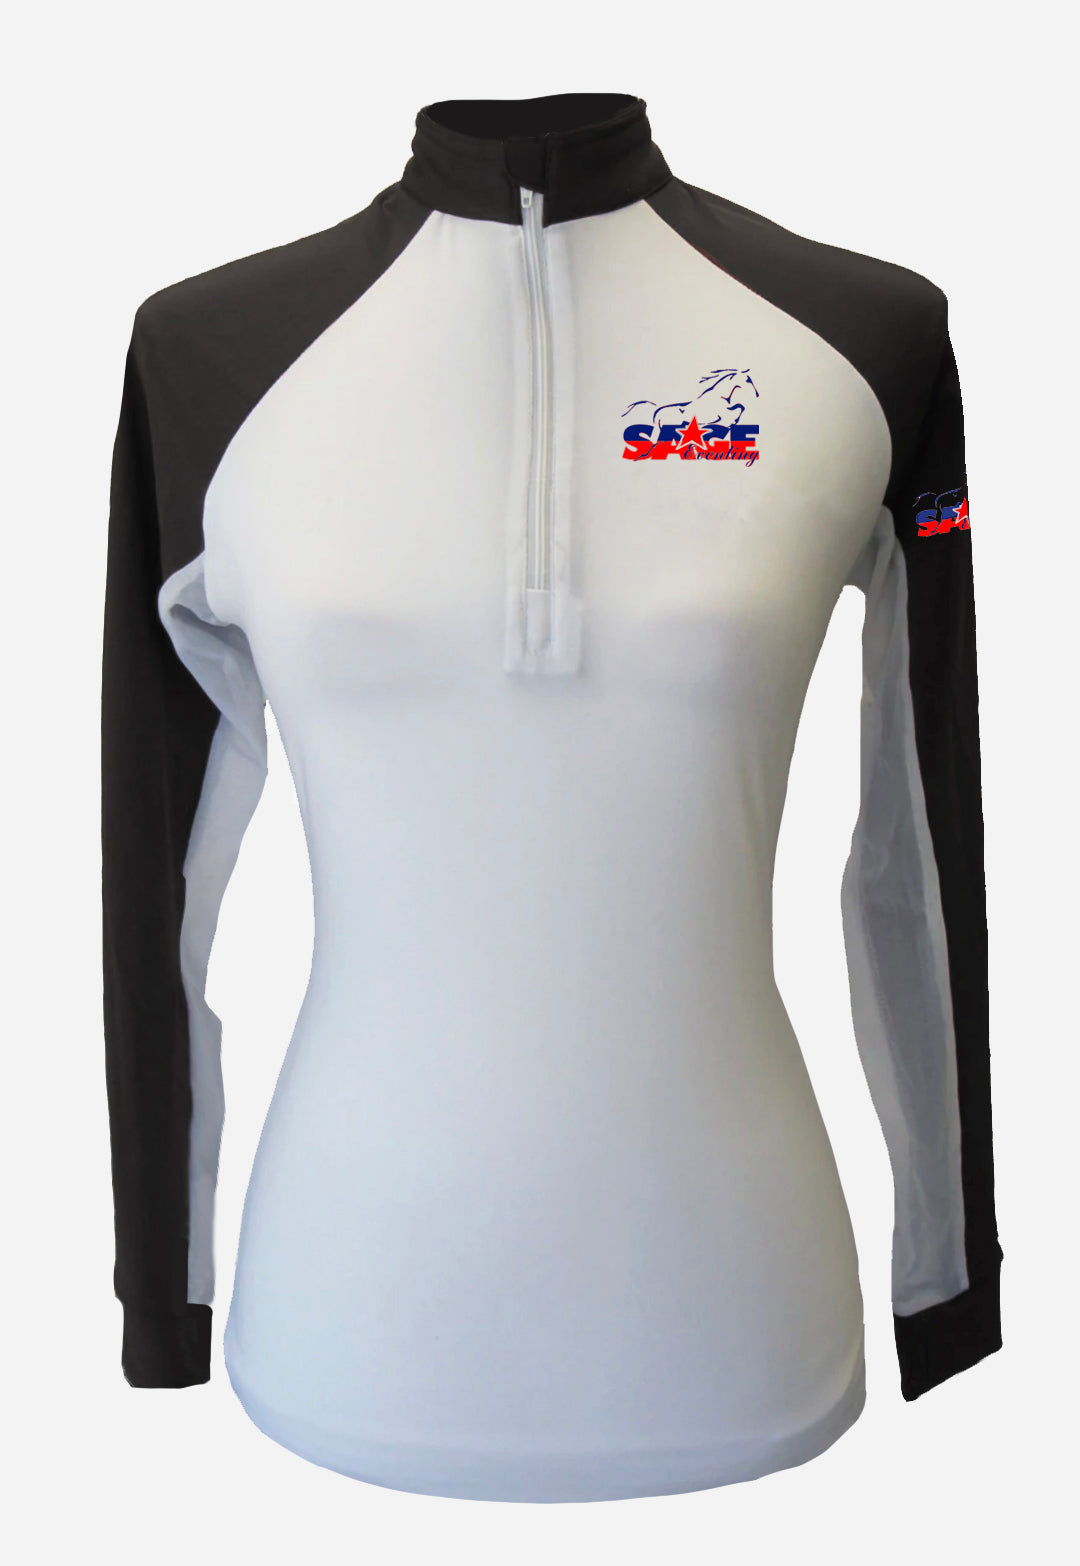 Sage eventing Custom Sun Shirt - White with Black Sleeves     Adult + Youth Sizes